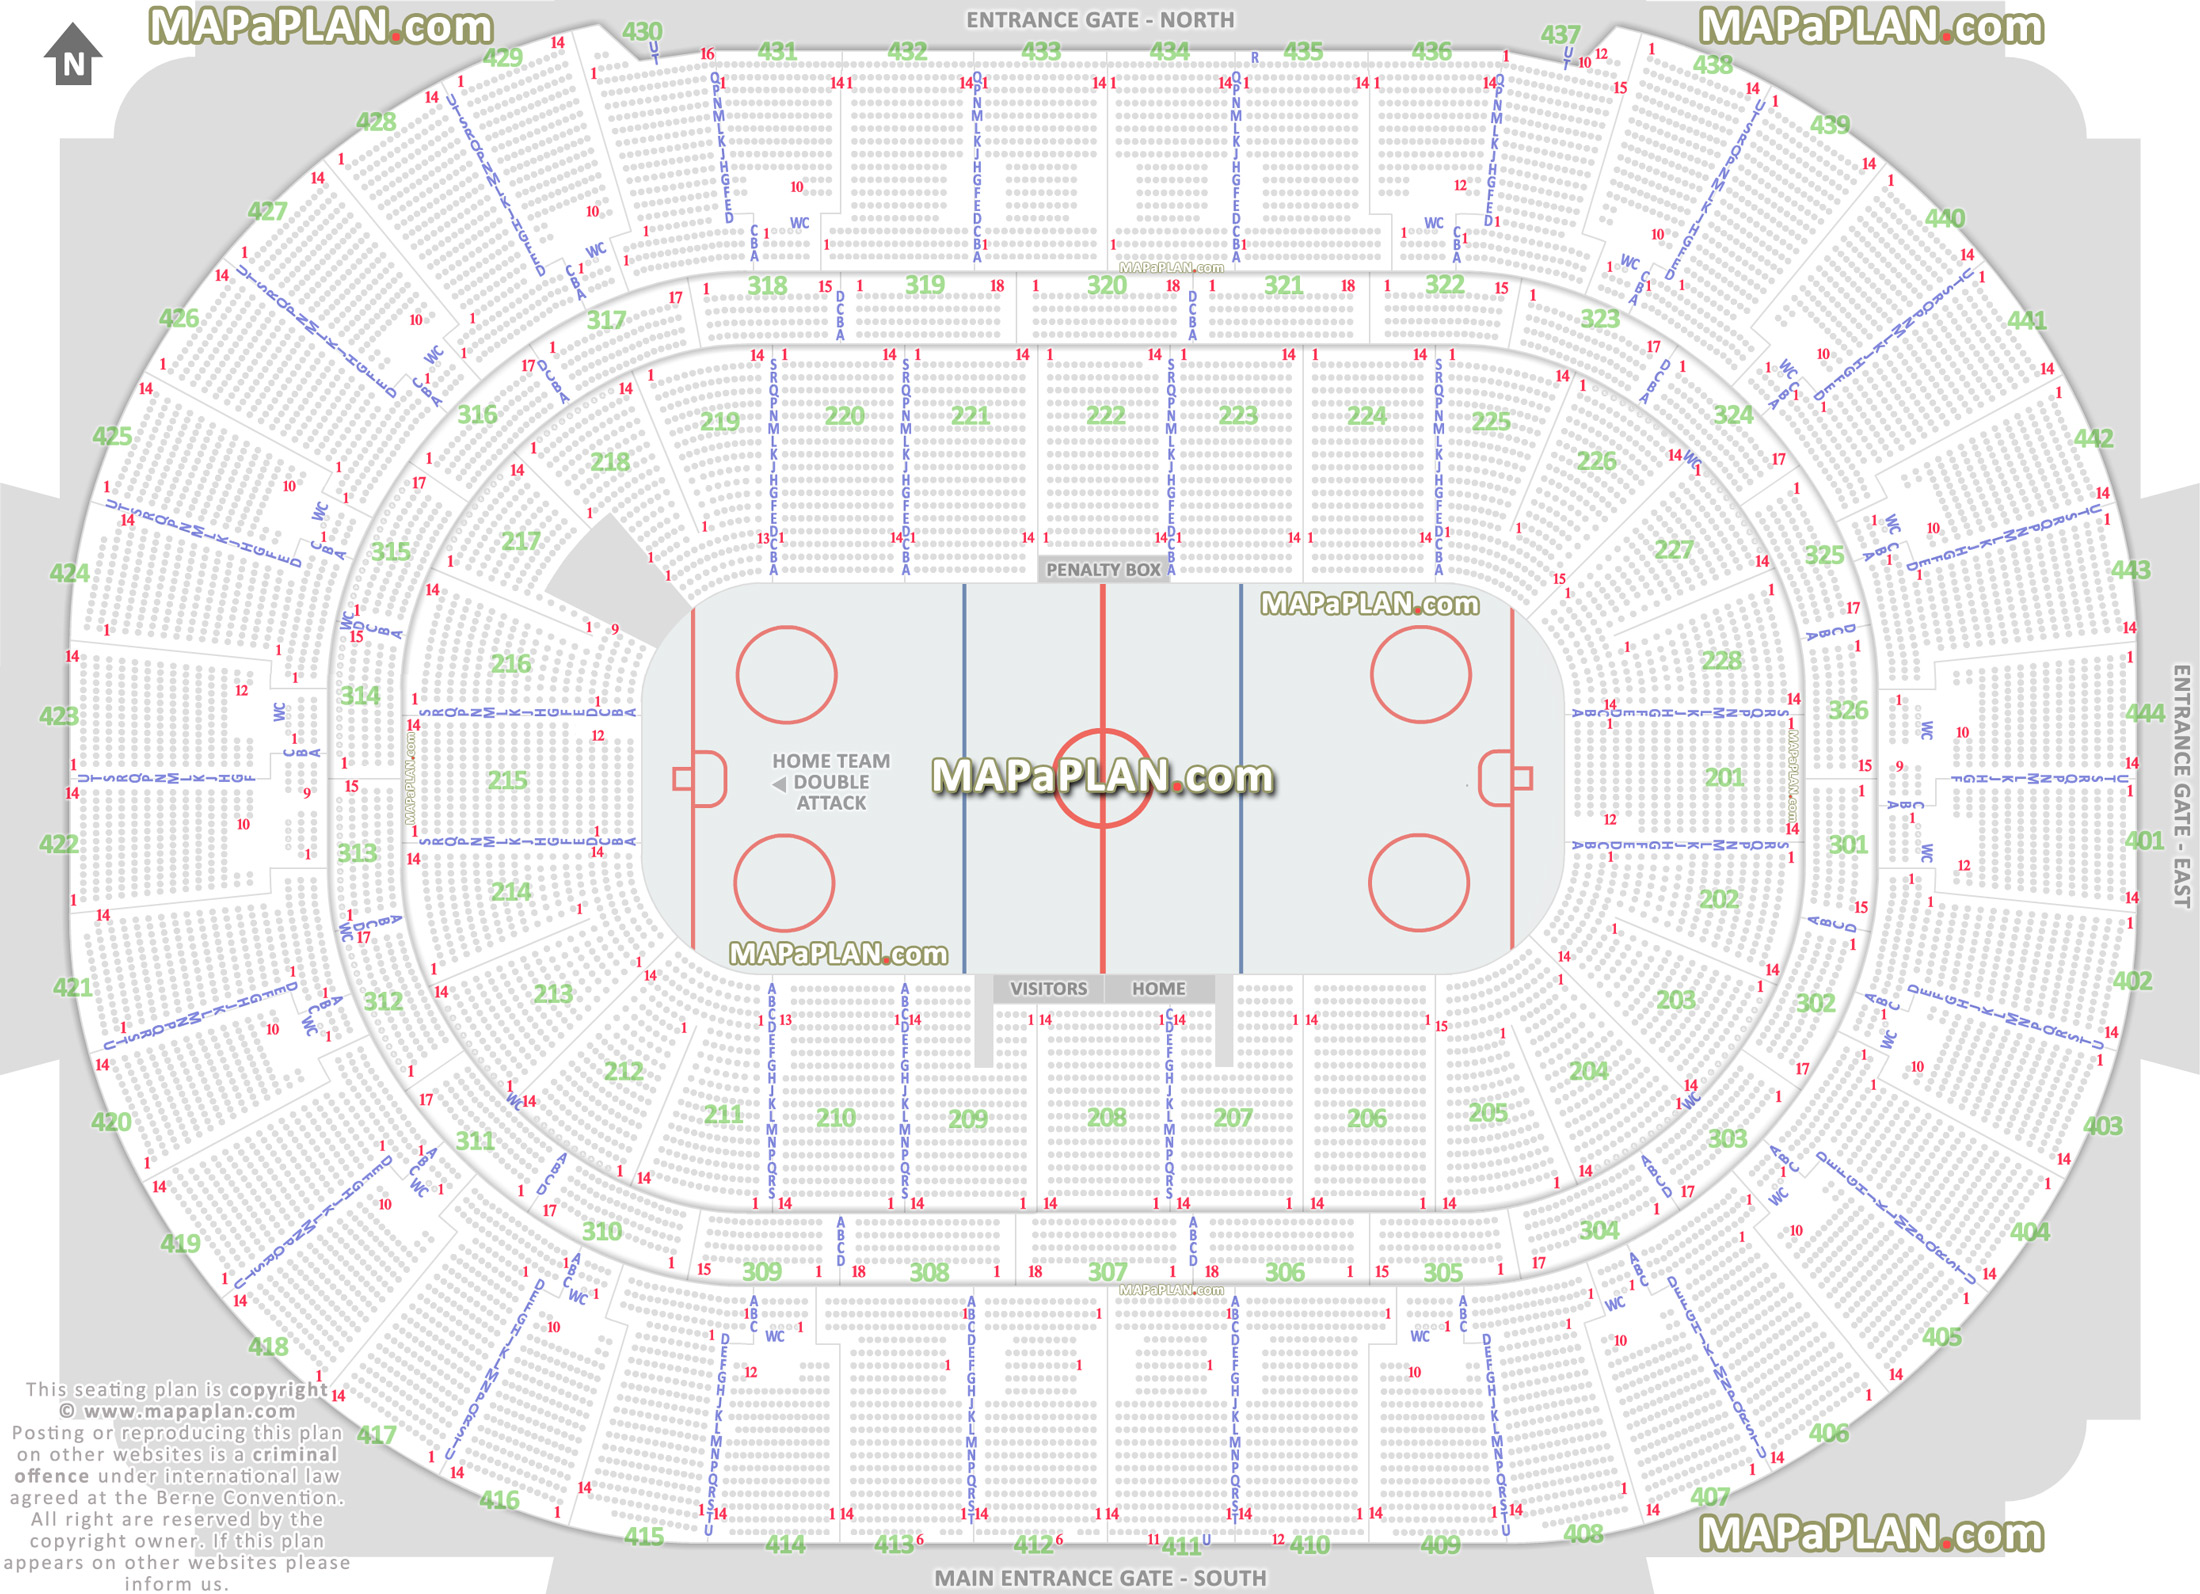 anaheim ducks new nhl stadium ice hockey rink individual find my seat locator penalty box home bench visitors double attack glass rinkside terrace value east west Anaheim Honda Center seating chart